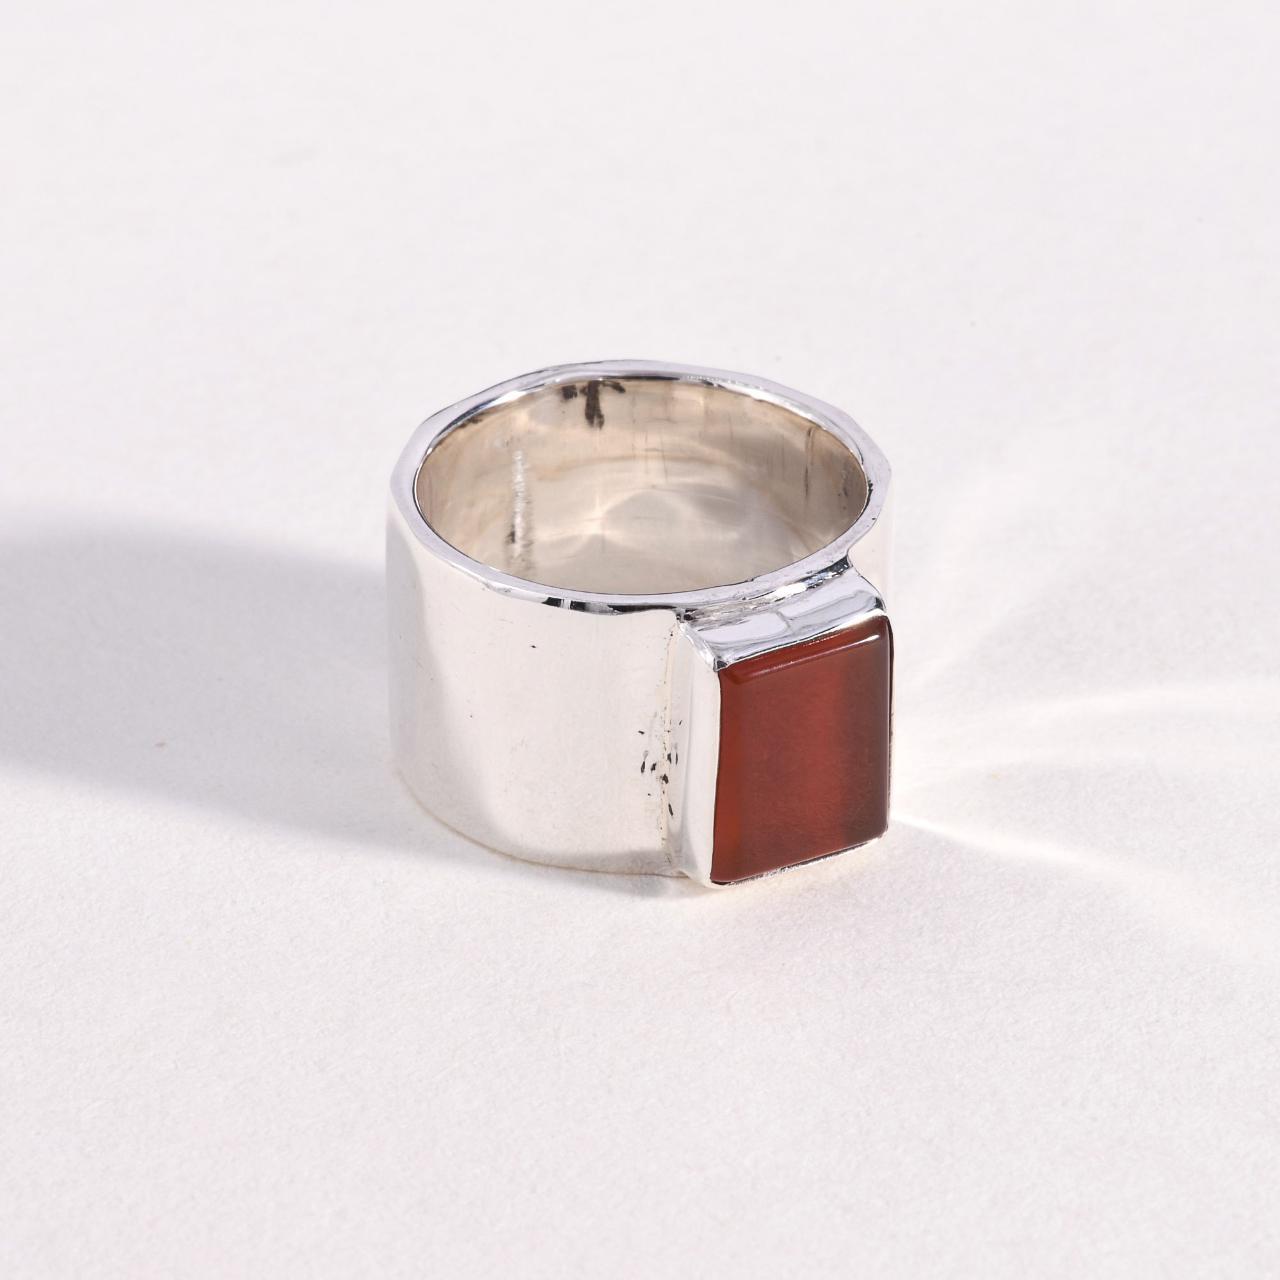 Product Image 1 - Sterling 925 Carnelian Ring

Sterling Silver

Size